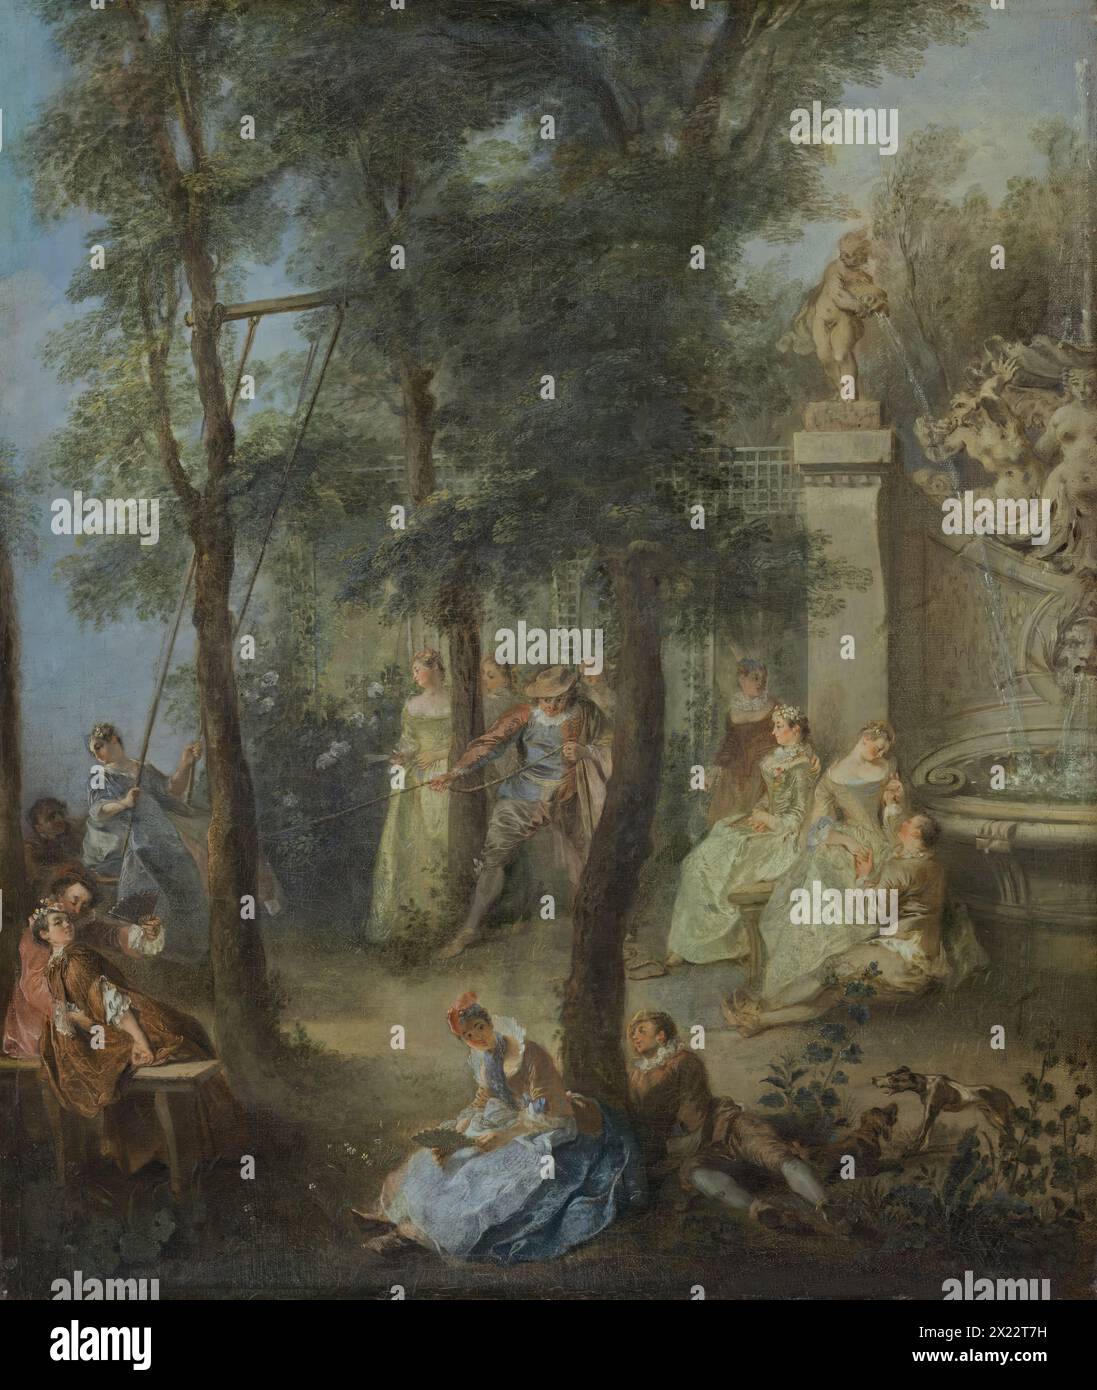 The Swing, 1735. The figures are arranged in groups around three trees whose trunks create a sense of depth due to the spaces visible between them and also determine the arrangement of the different scenes. The couples engaged in amorous flirtation in the foreground are followed by the principal motif of the swing in the middle-ground to the left. A woman, seated on the swing, is pushed by two men, one behind her and the other energetically pulling on a rope in the middle of the composition. The background includes more amorous couples seated around the edge of the fountain. The rhythms of the Stock Photo